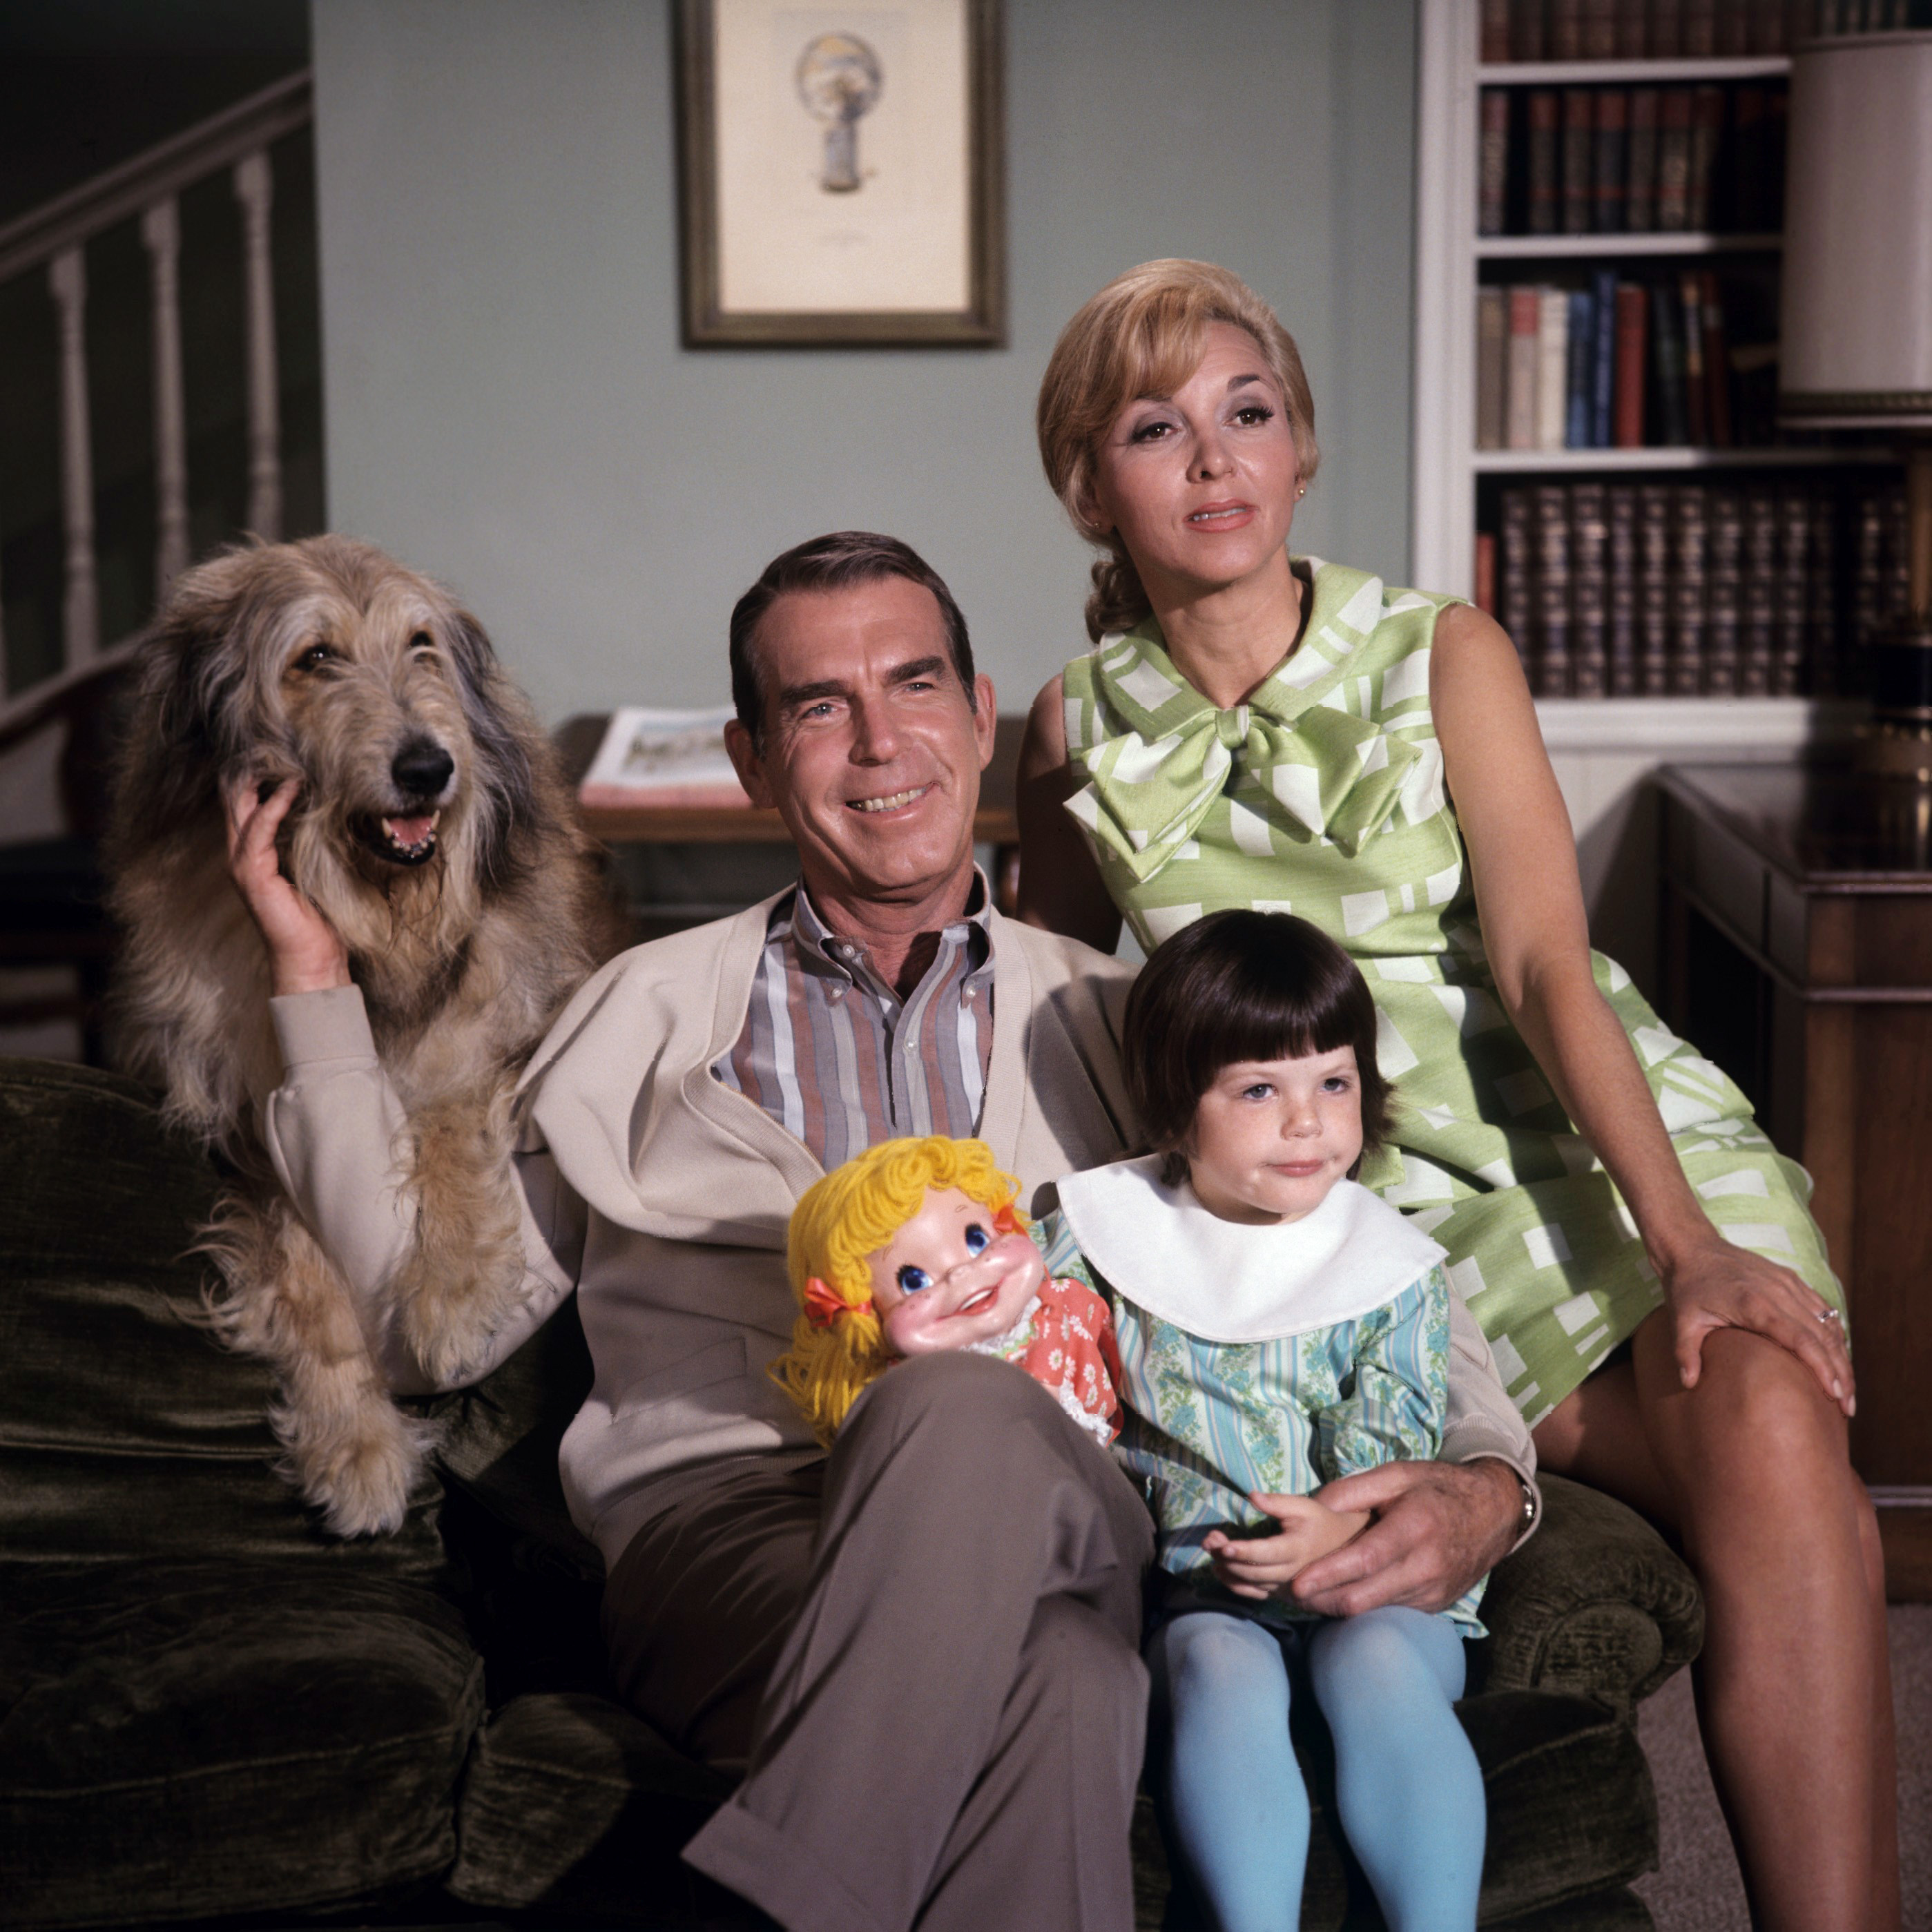 Fred MacMurray, Dawn Lyn, Beverly Garland as their characters in "My Three Sons" in 1969 | Source: Getty Images